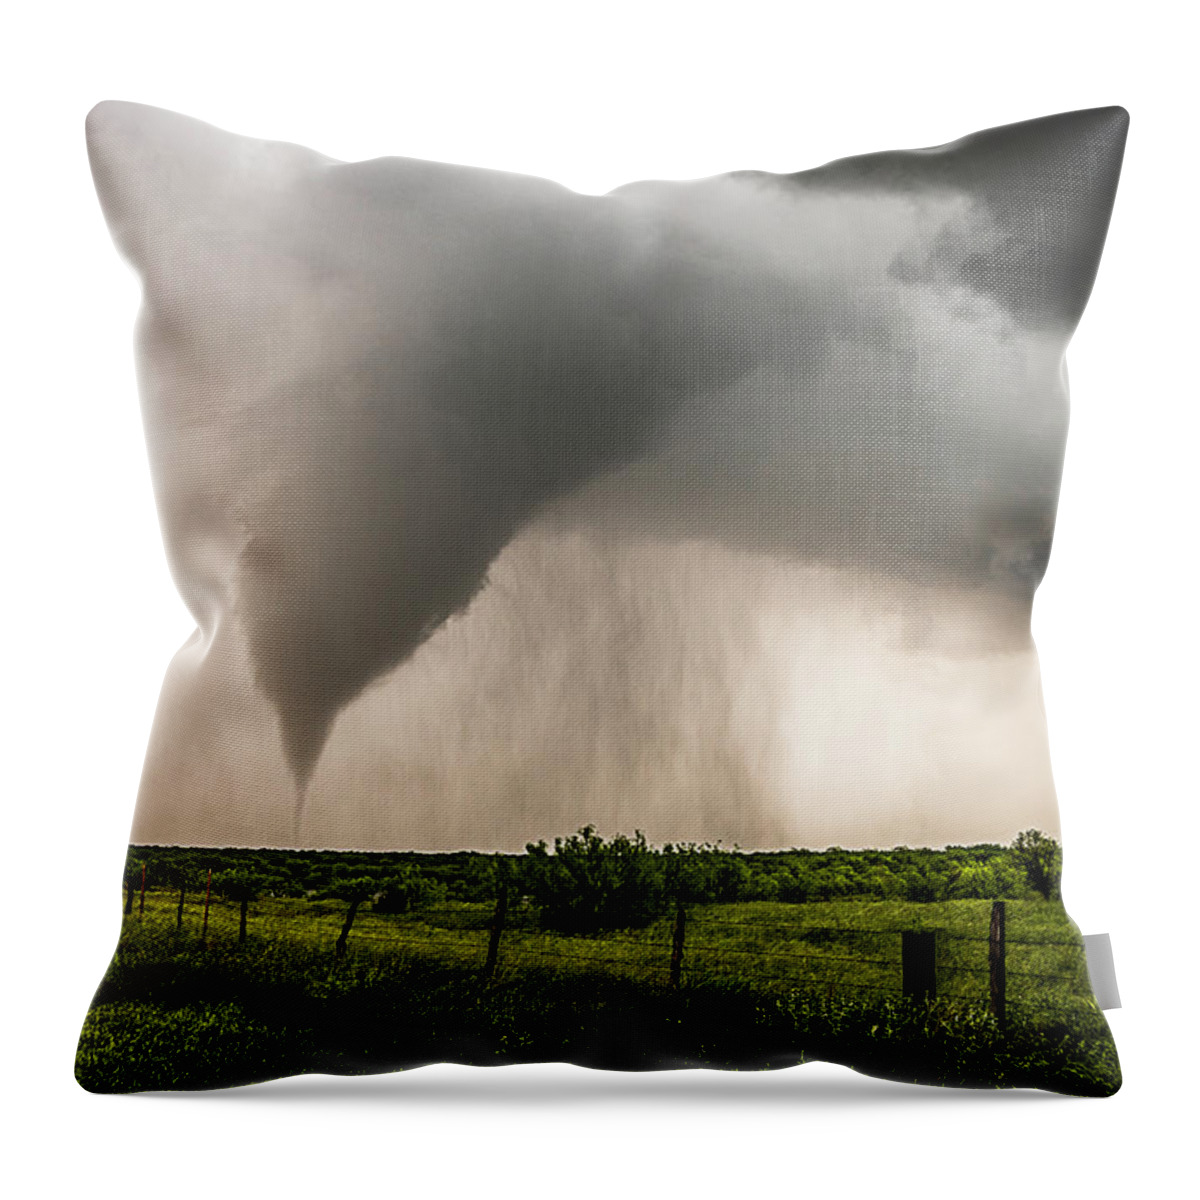 Tornado Throw Pillow featuring the photograph Bee Stinger Tornado by Marcus Hustedde